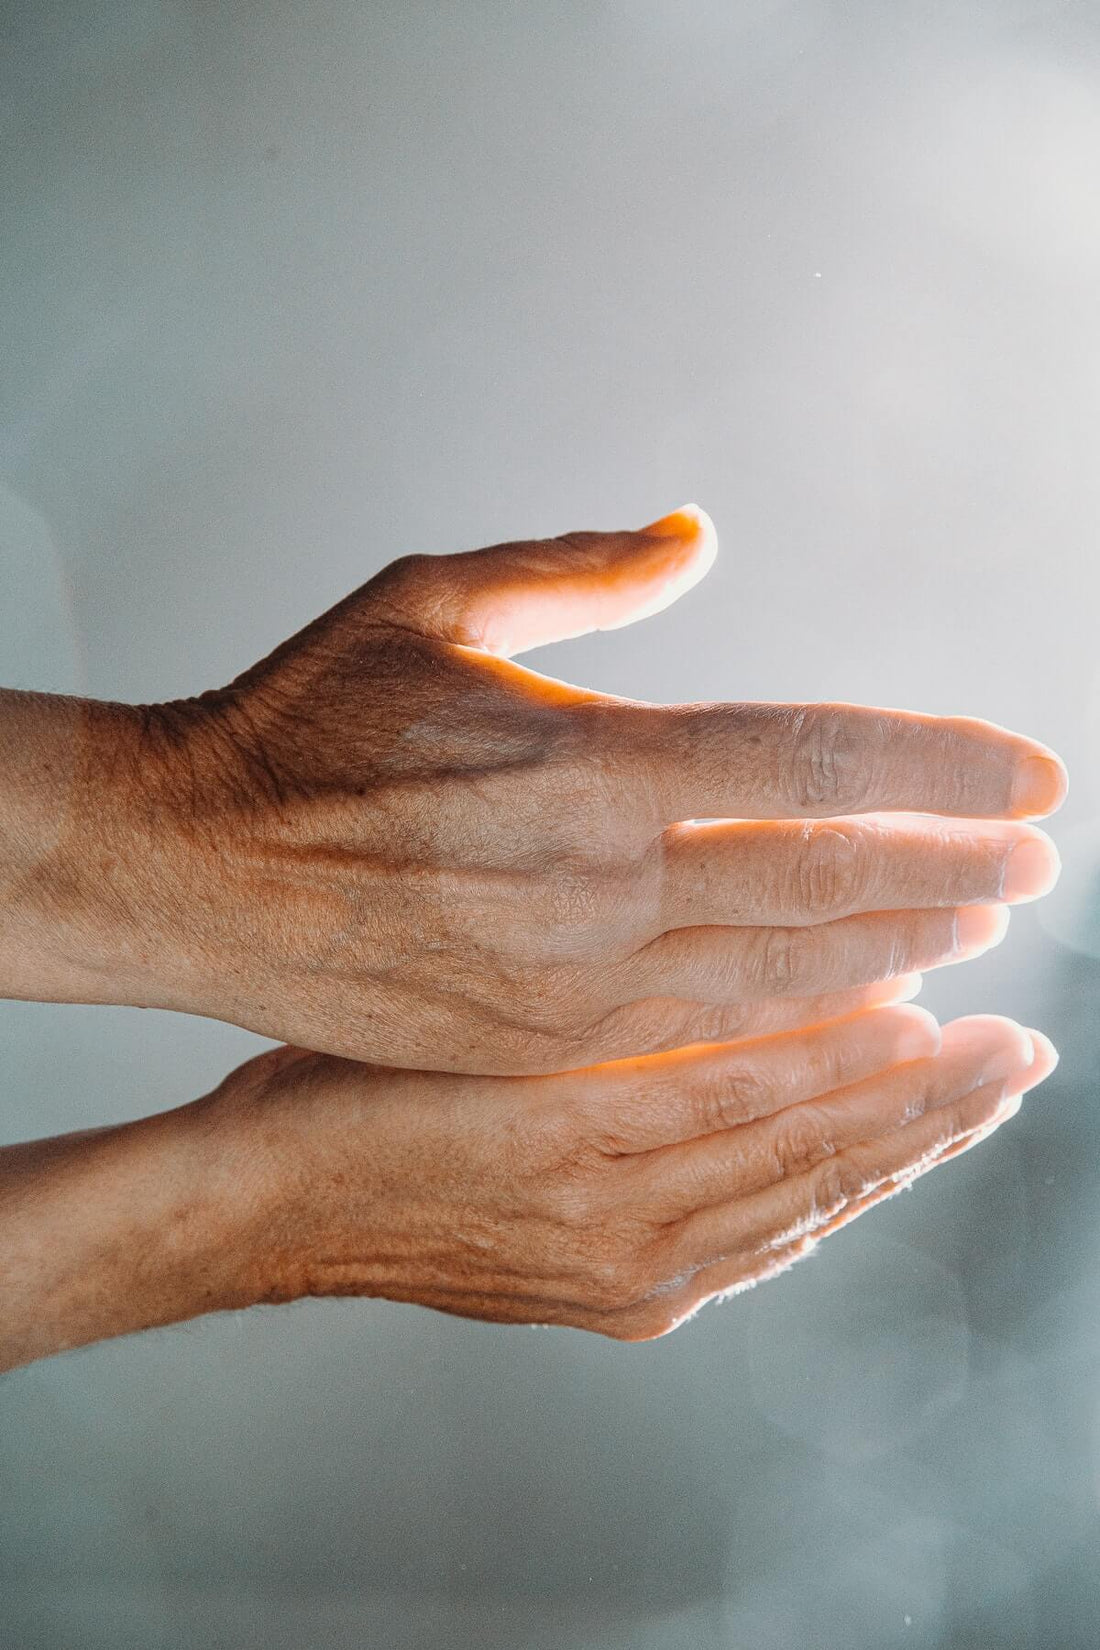 A person holds out their hands to feel a ray of light on their palms. This is part of an energy medicine treatment to help with anxiety, stress, and depression.